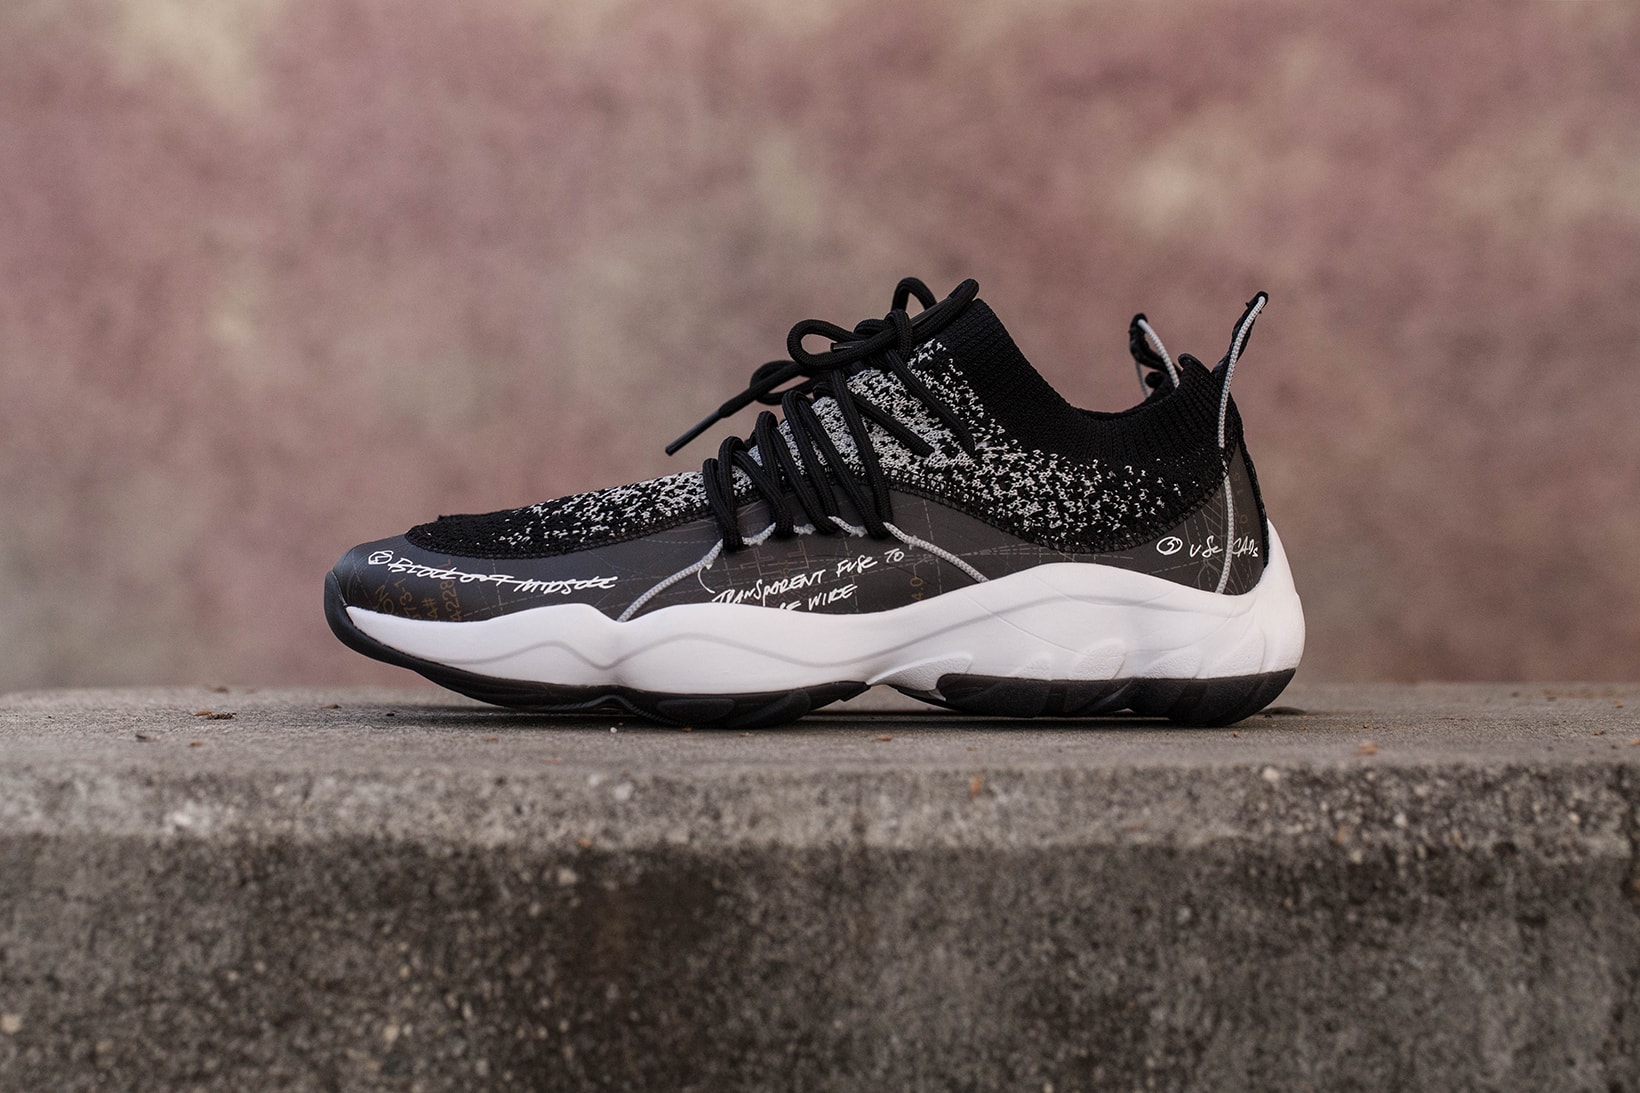 BAIT Reebok DMX 10 Fusion Ideation Department pack 2018 february release date info sneakers shoes footwear